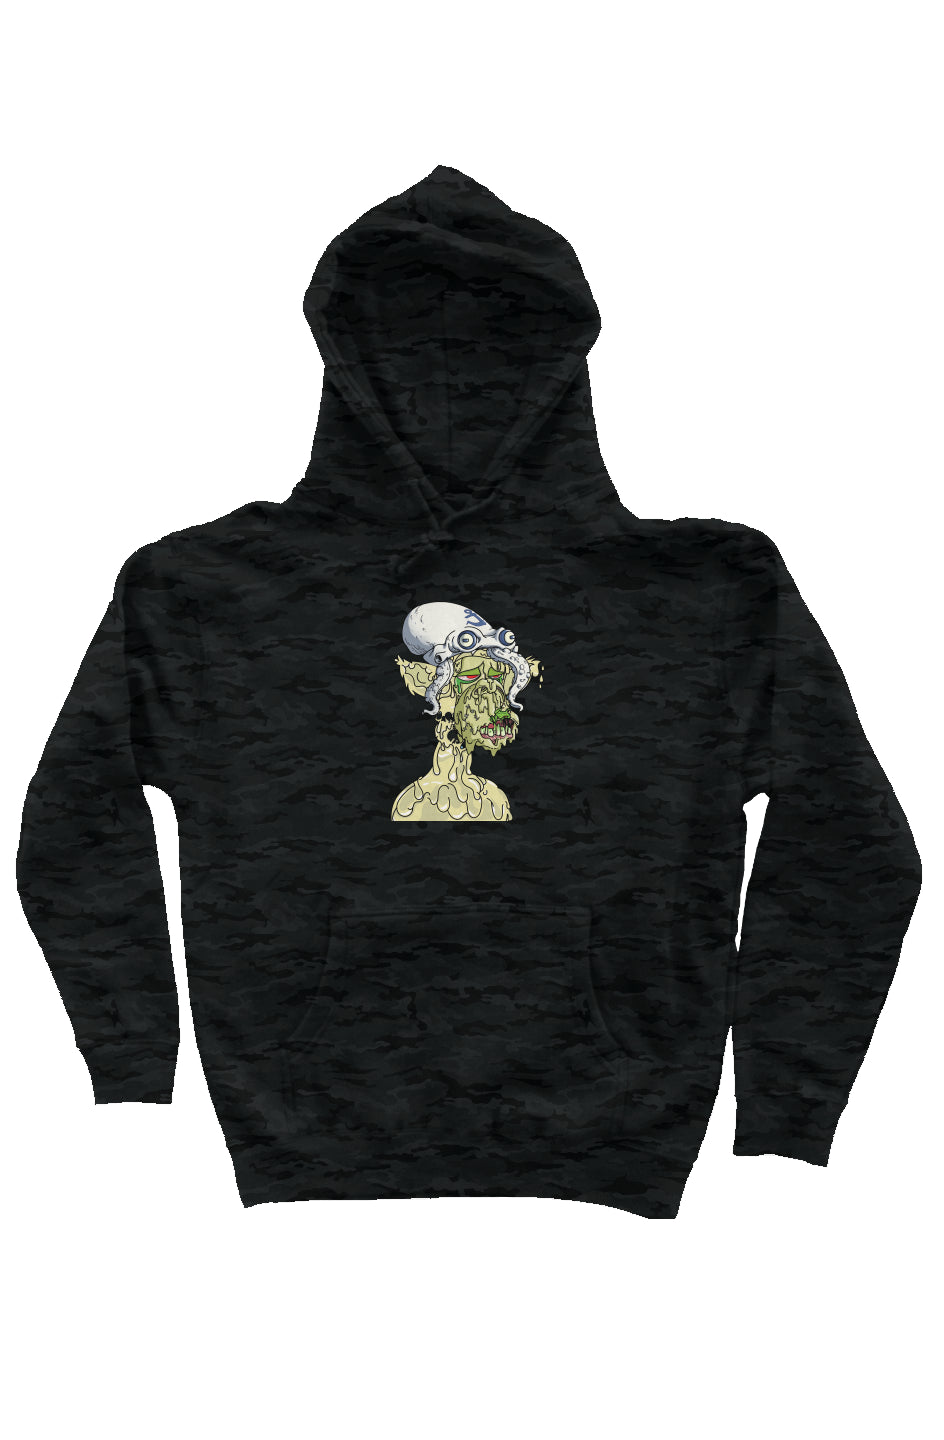 Camo Independent Heavyweight Hoodie feat Polygon Mutant #5169